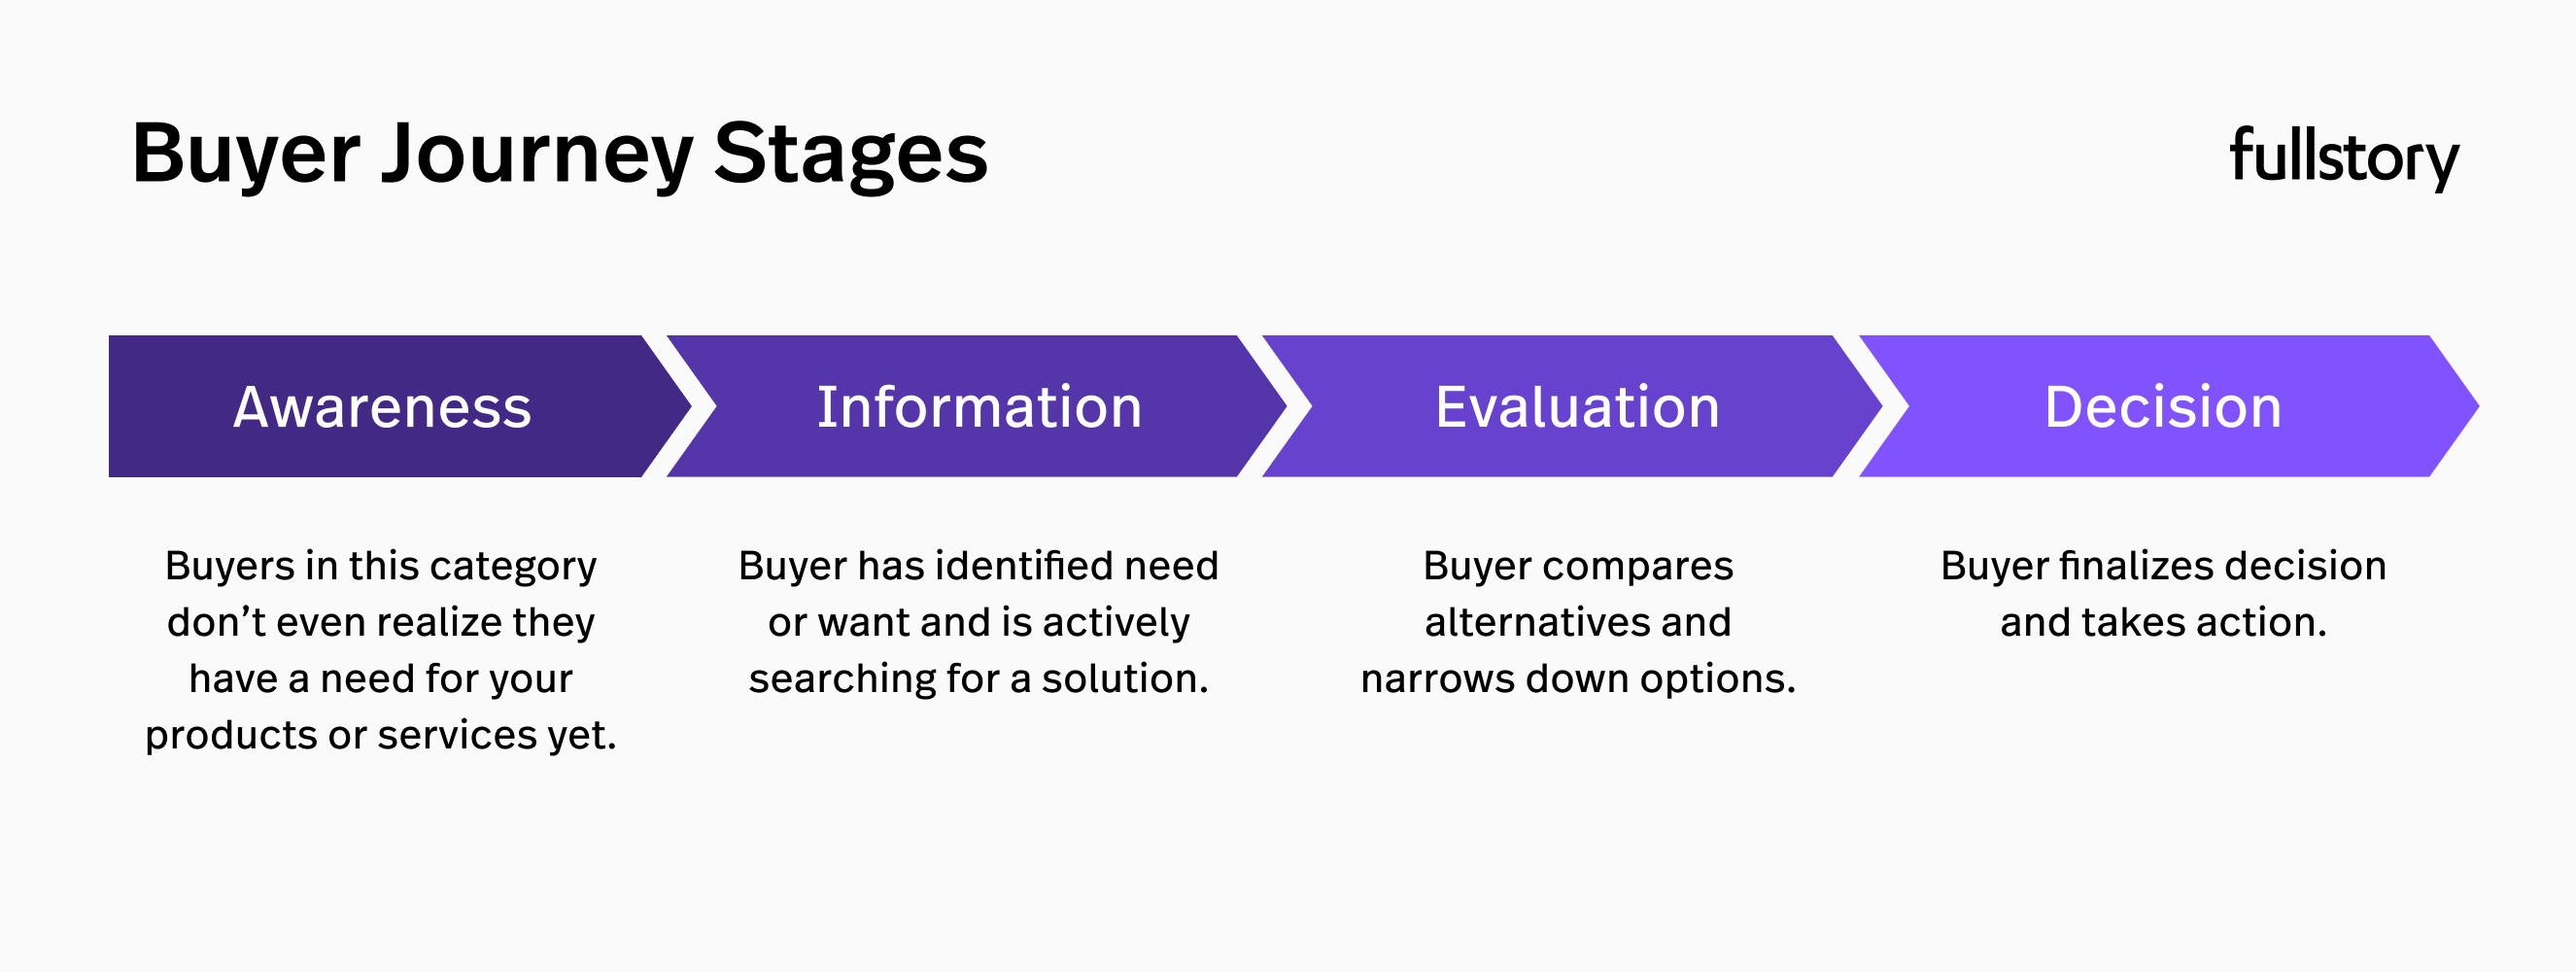 Buyer journey stages: Awareness, information, evaluation, decision.